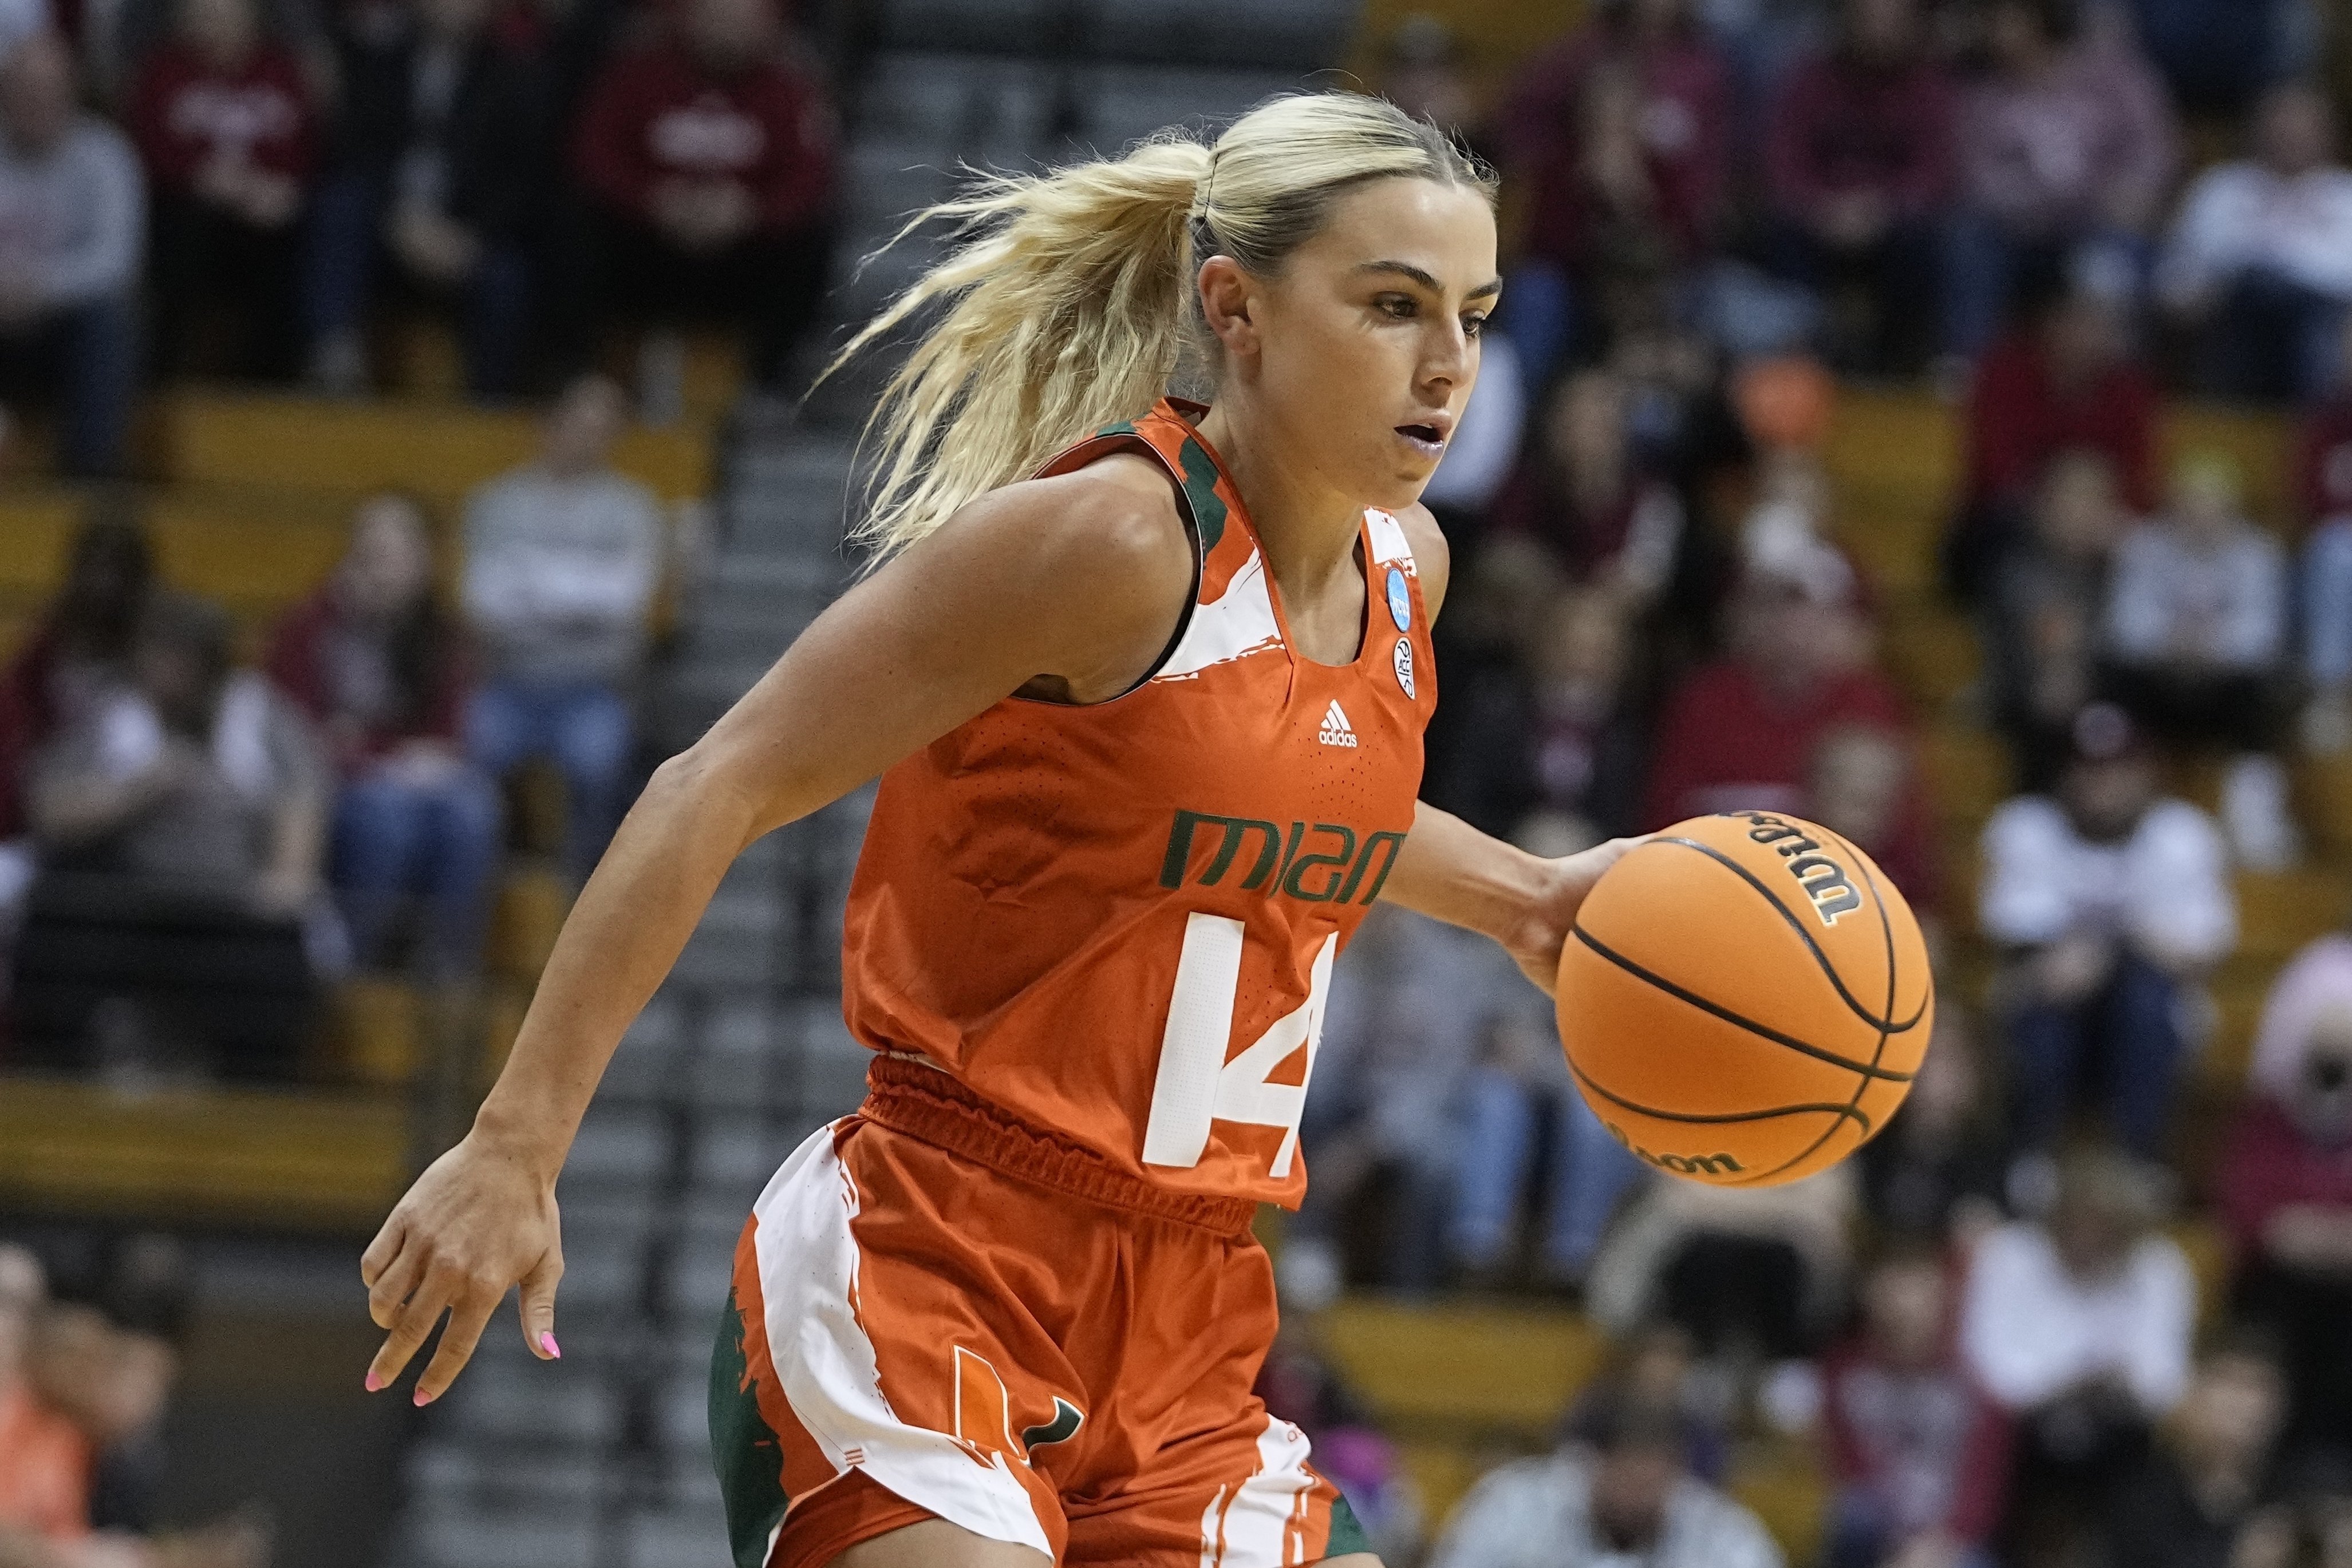 First Look at Miami Hurricanes Basketball Schedule - State of The U